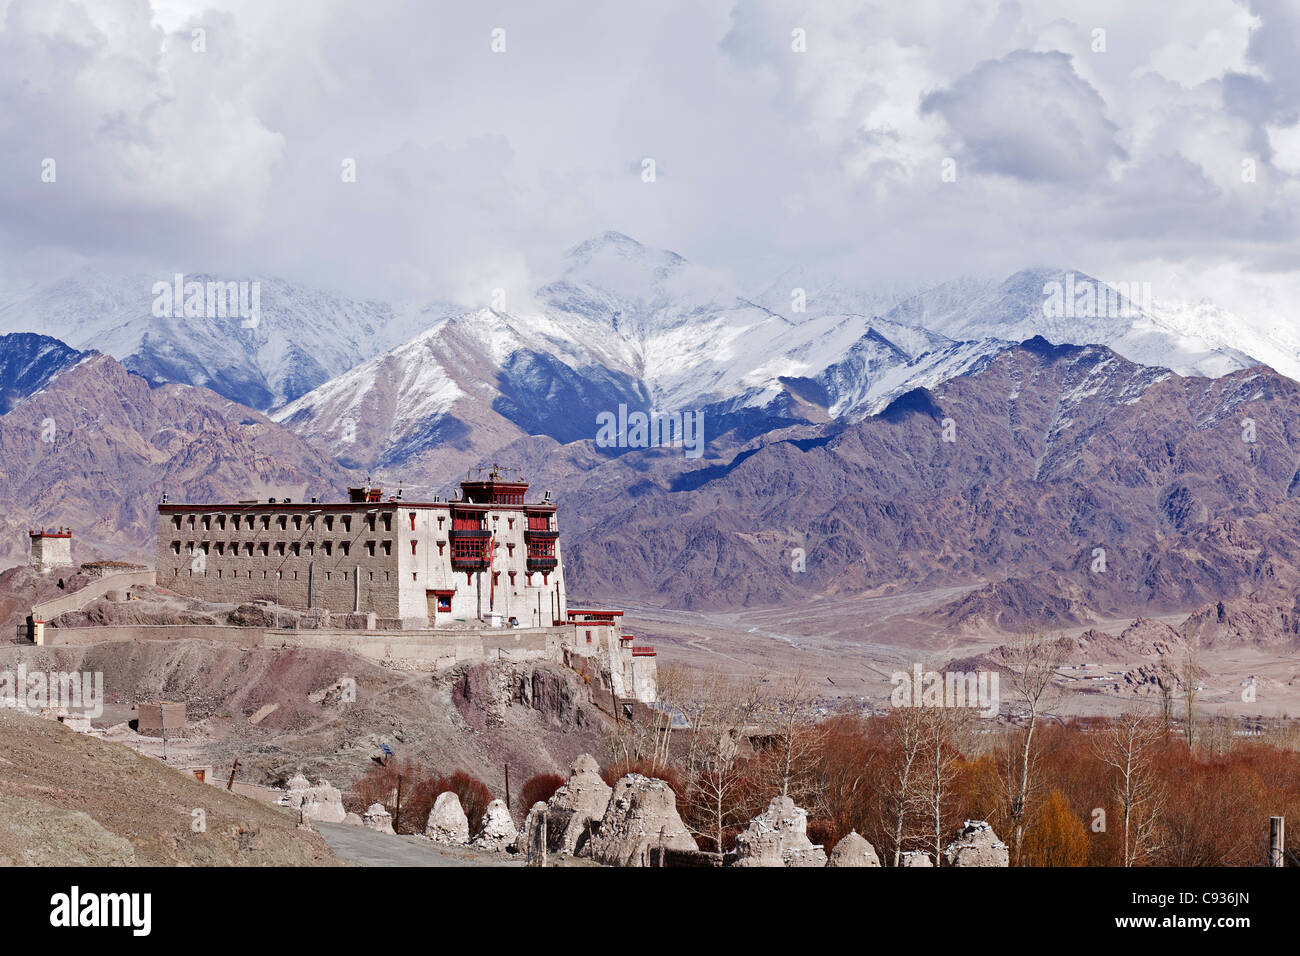 India, Ladakh, Stok. Stok Palace, home to the Queen of Ladakh, with the Ladakh Range in the background. Stock Photo